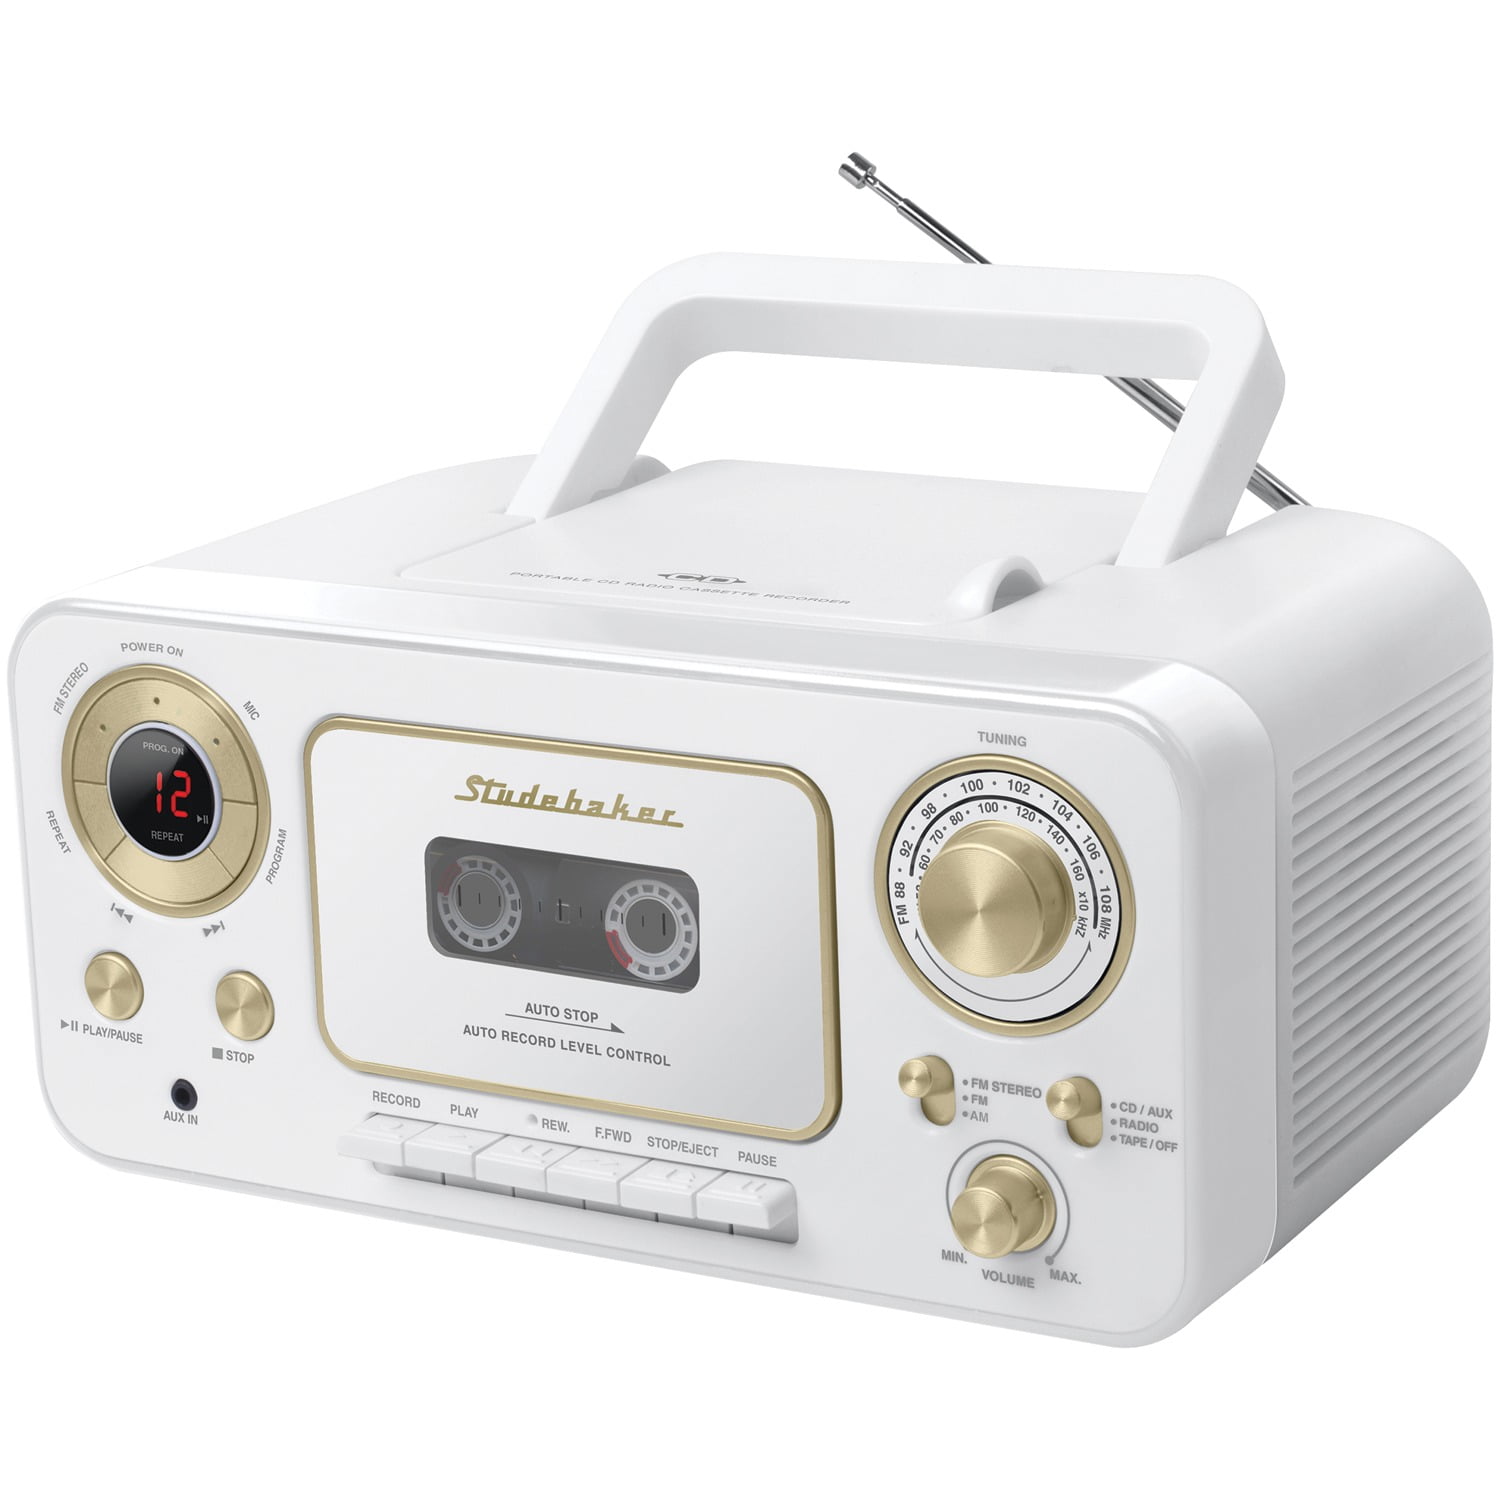 Studebaker Portable Stereo CD Player with AM/FM Radio & Cassette Player/Recorder (White & Gold) - Walmart.com